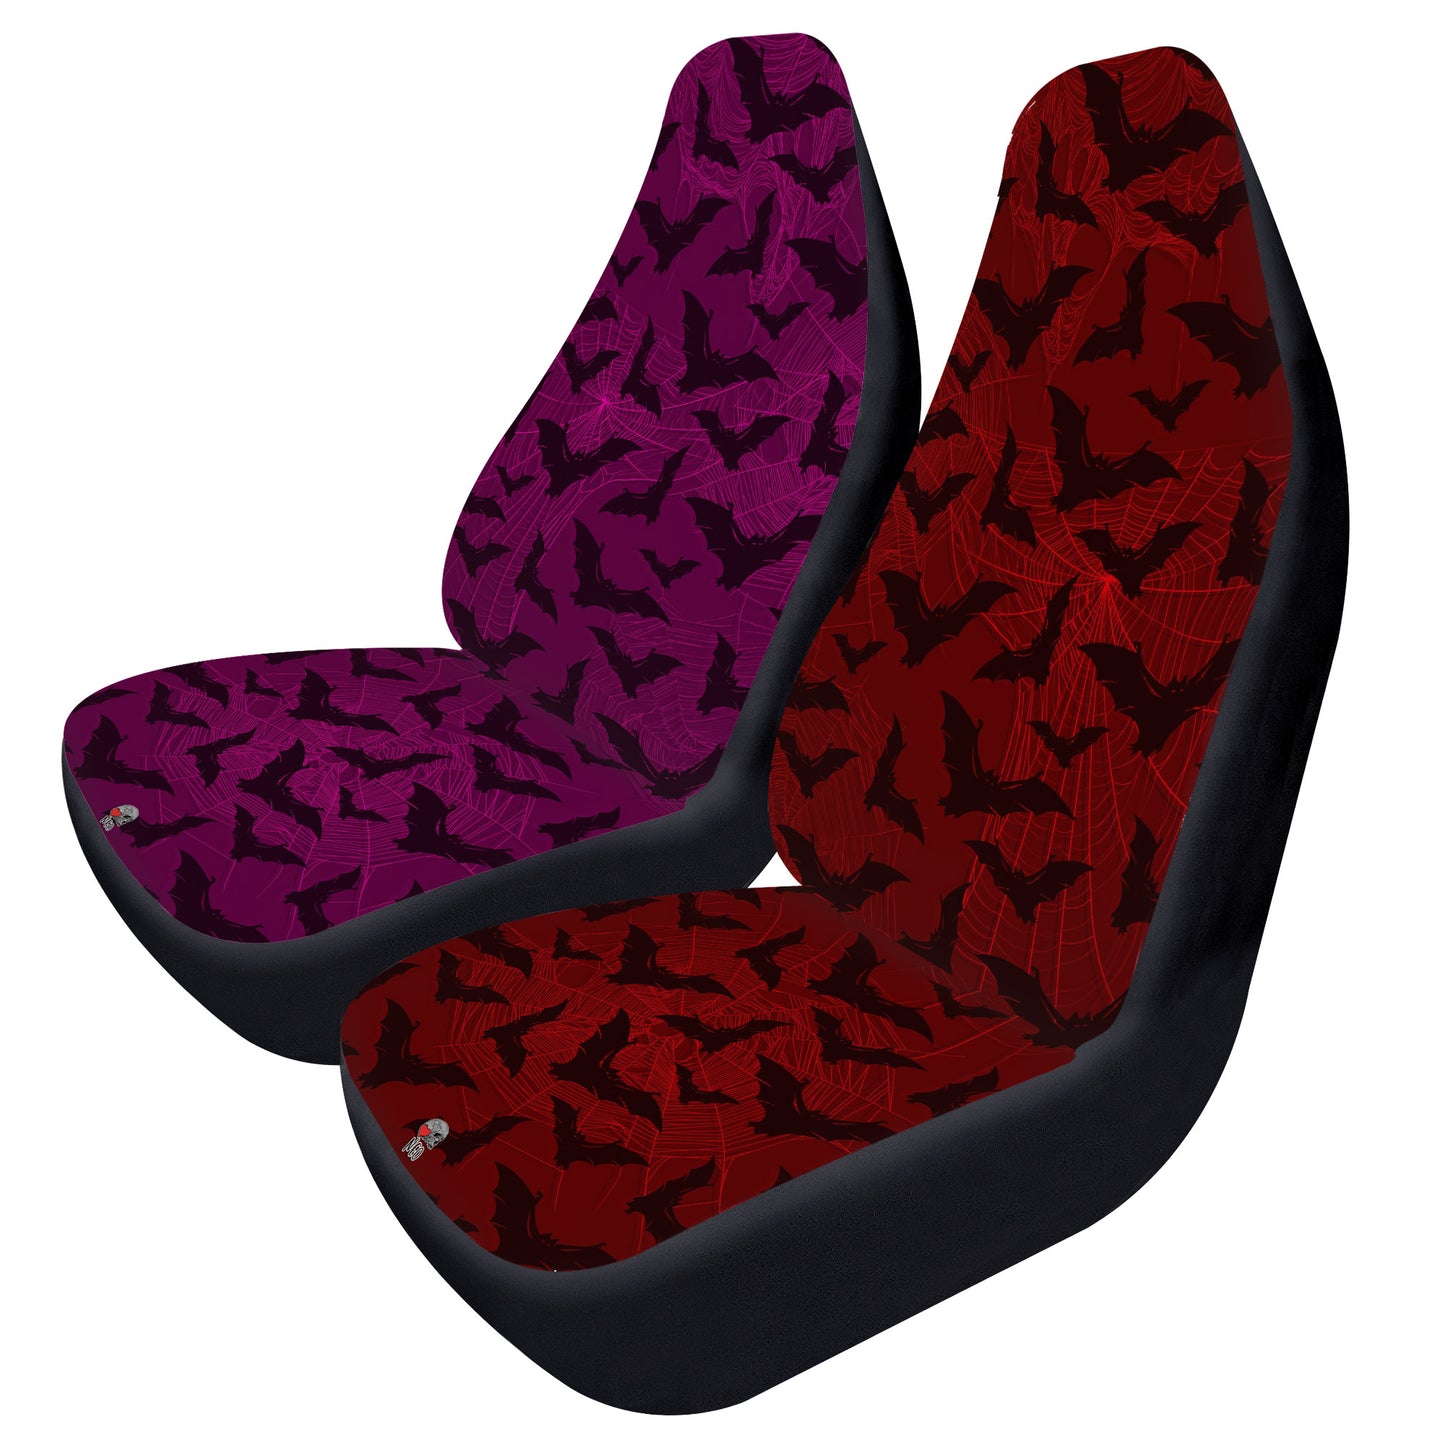 Bats and Spiderweb two colors Car Seat Covers